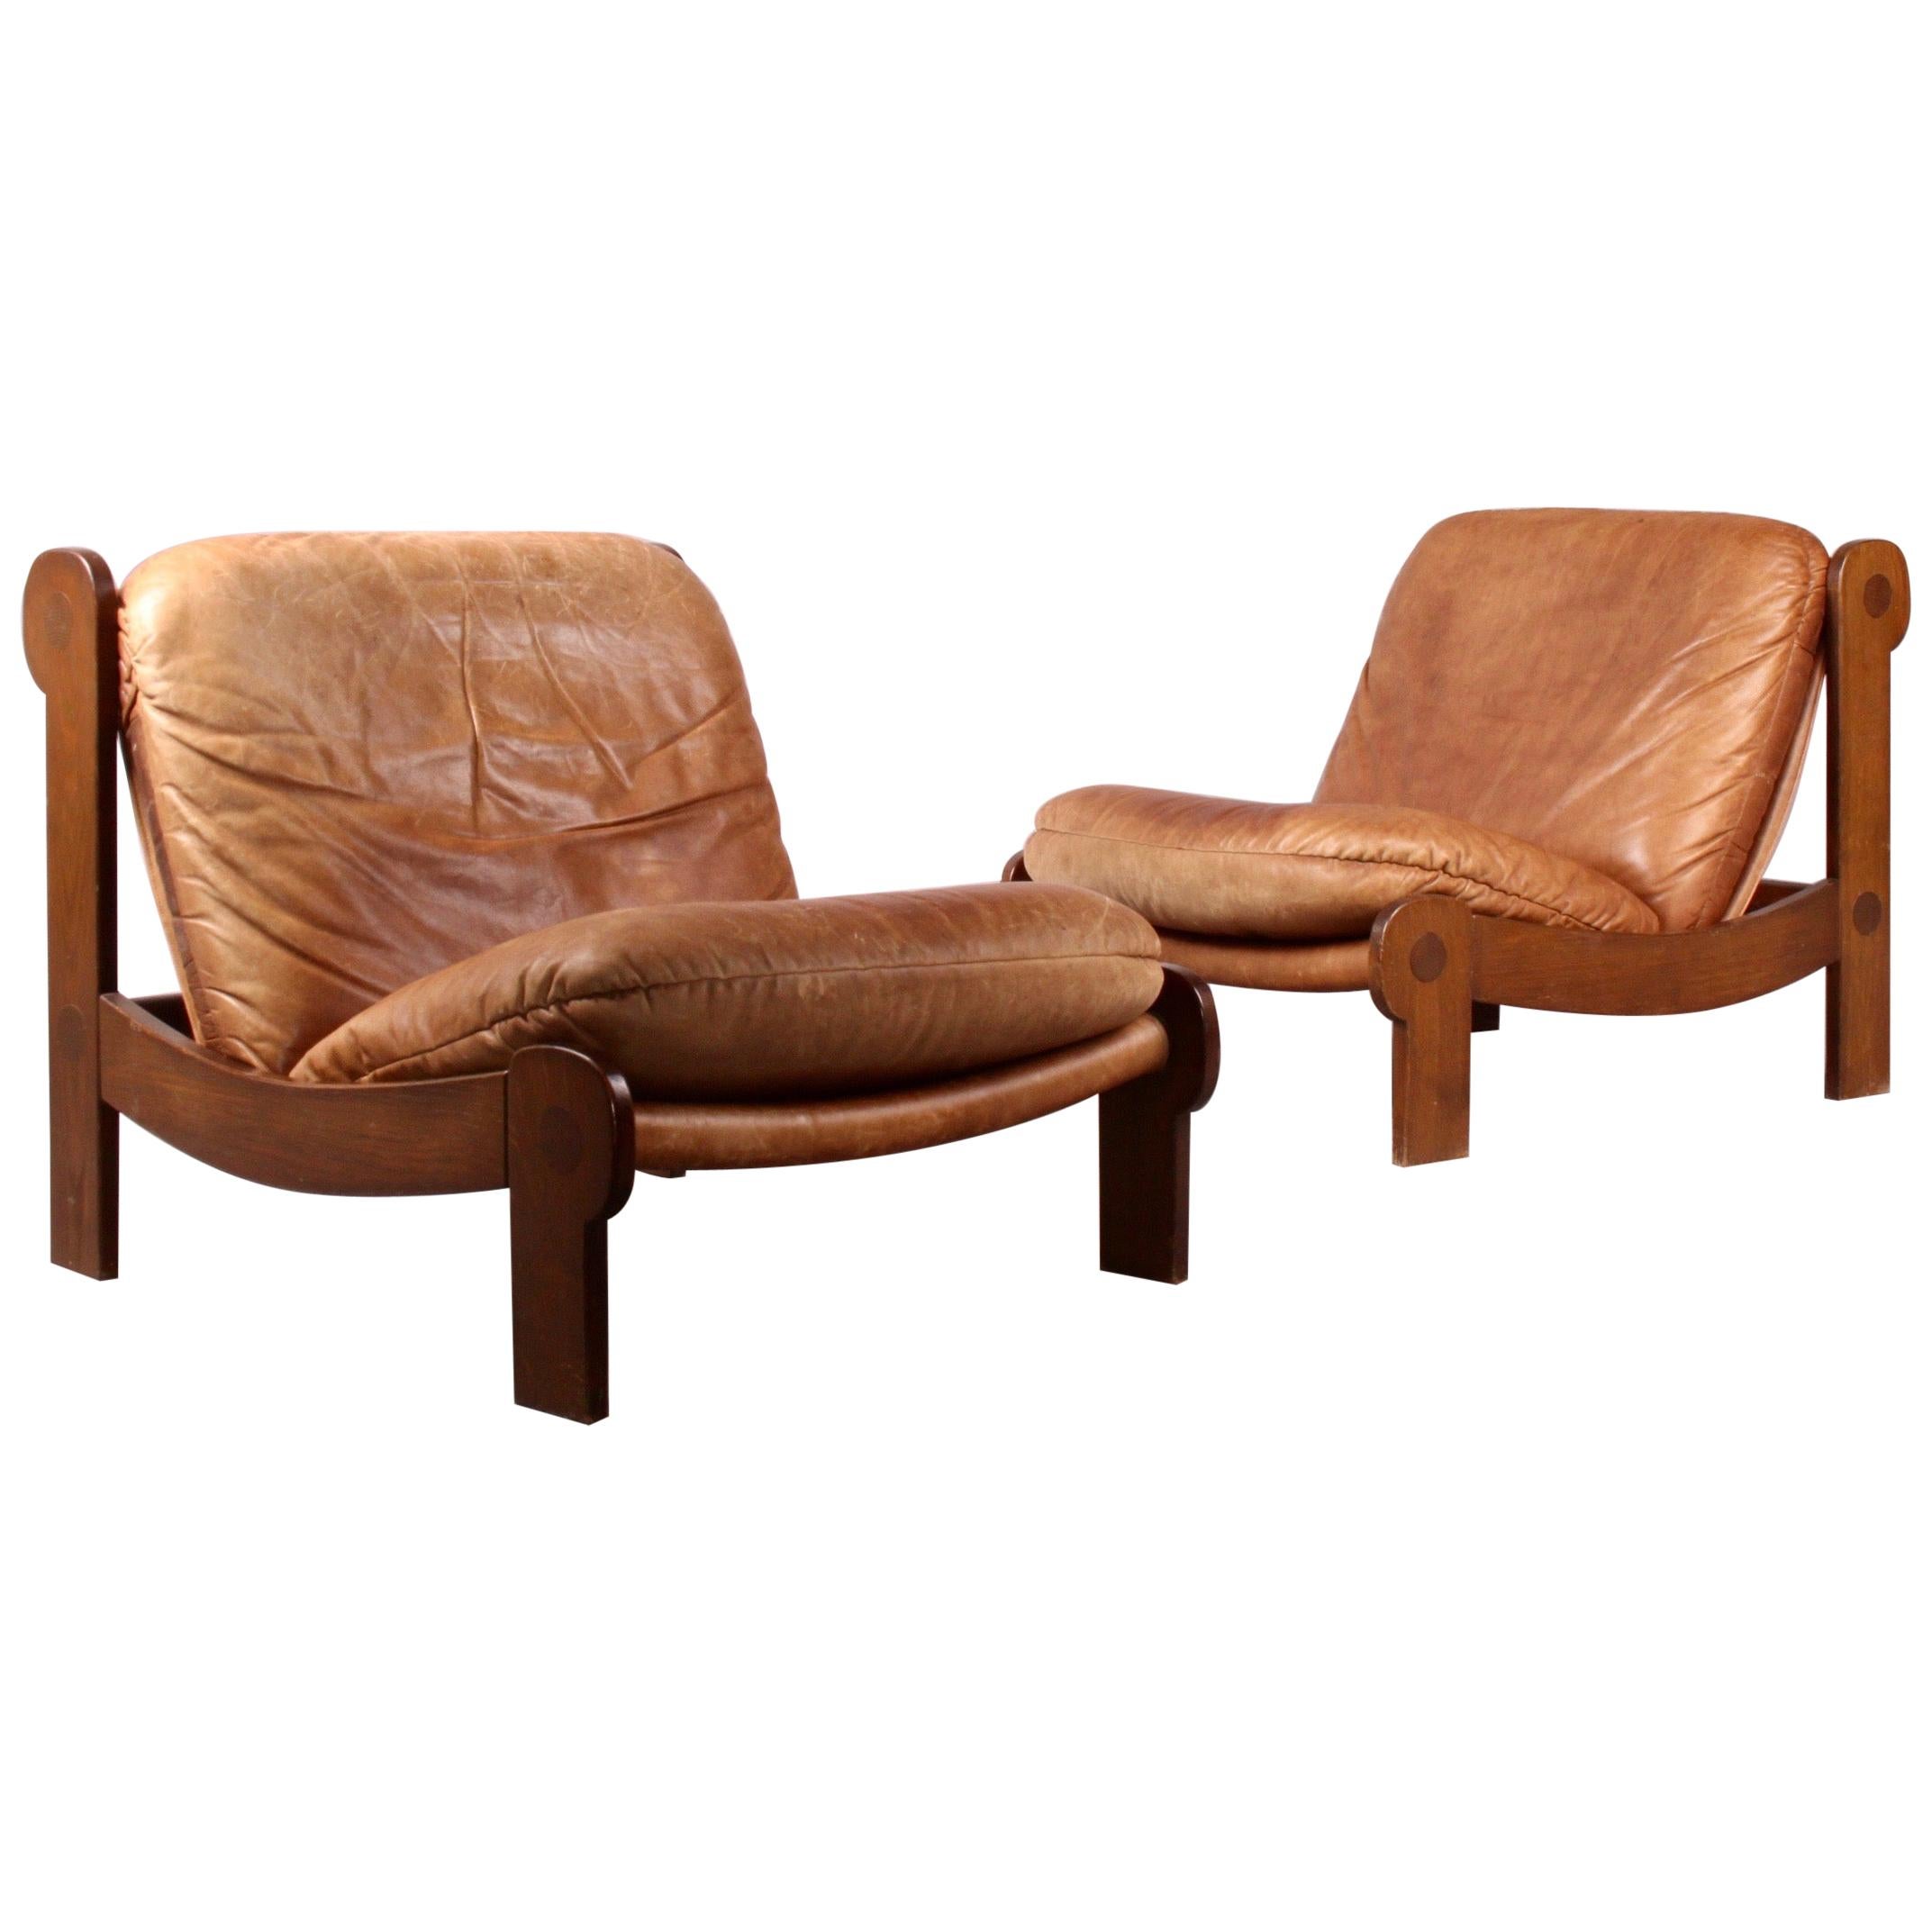 Pair of Leather and Wood Armchairs